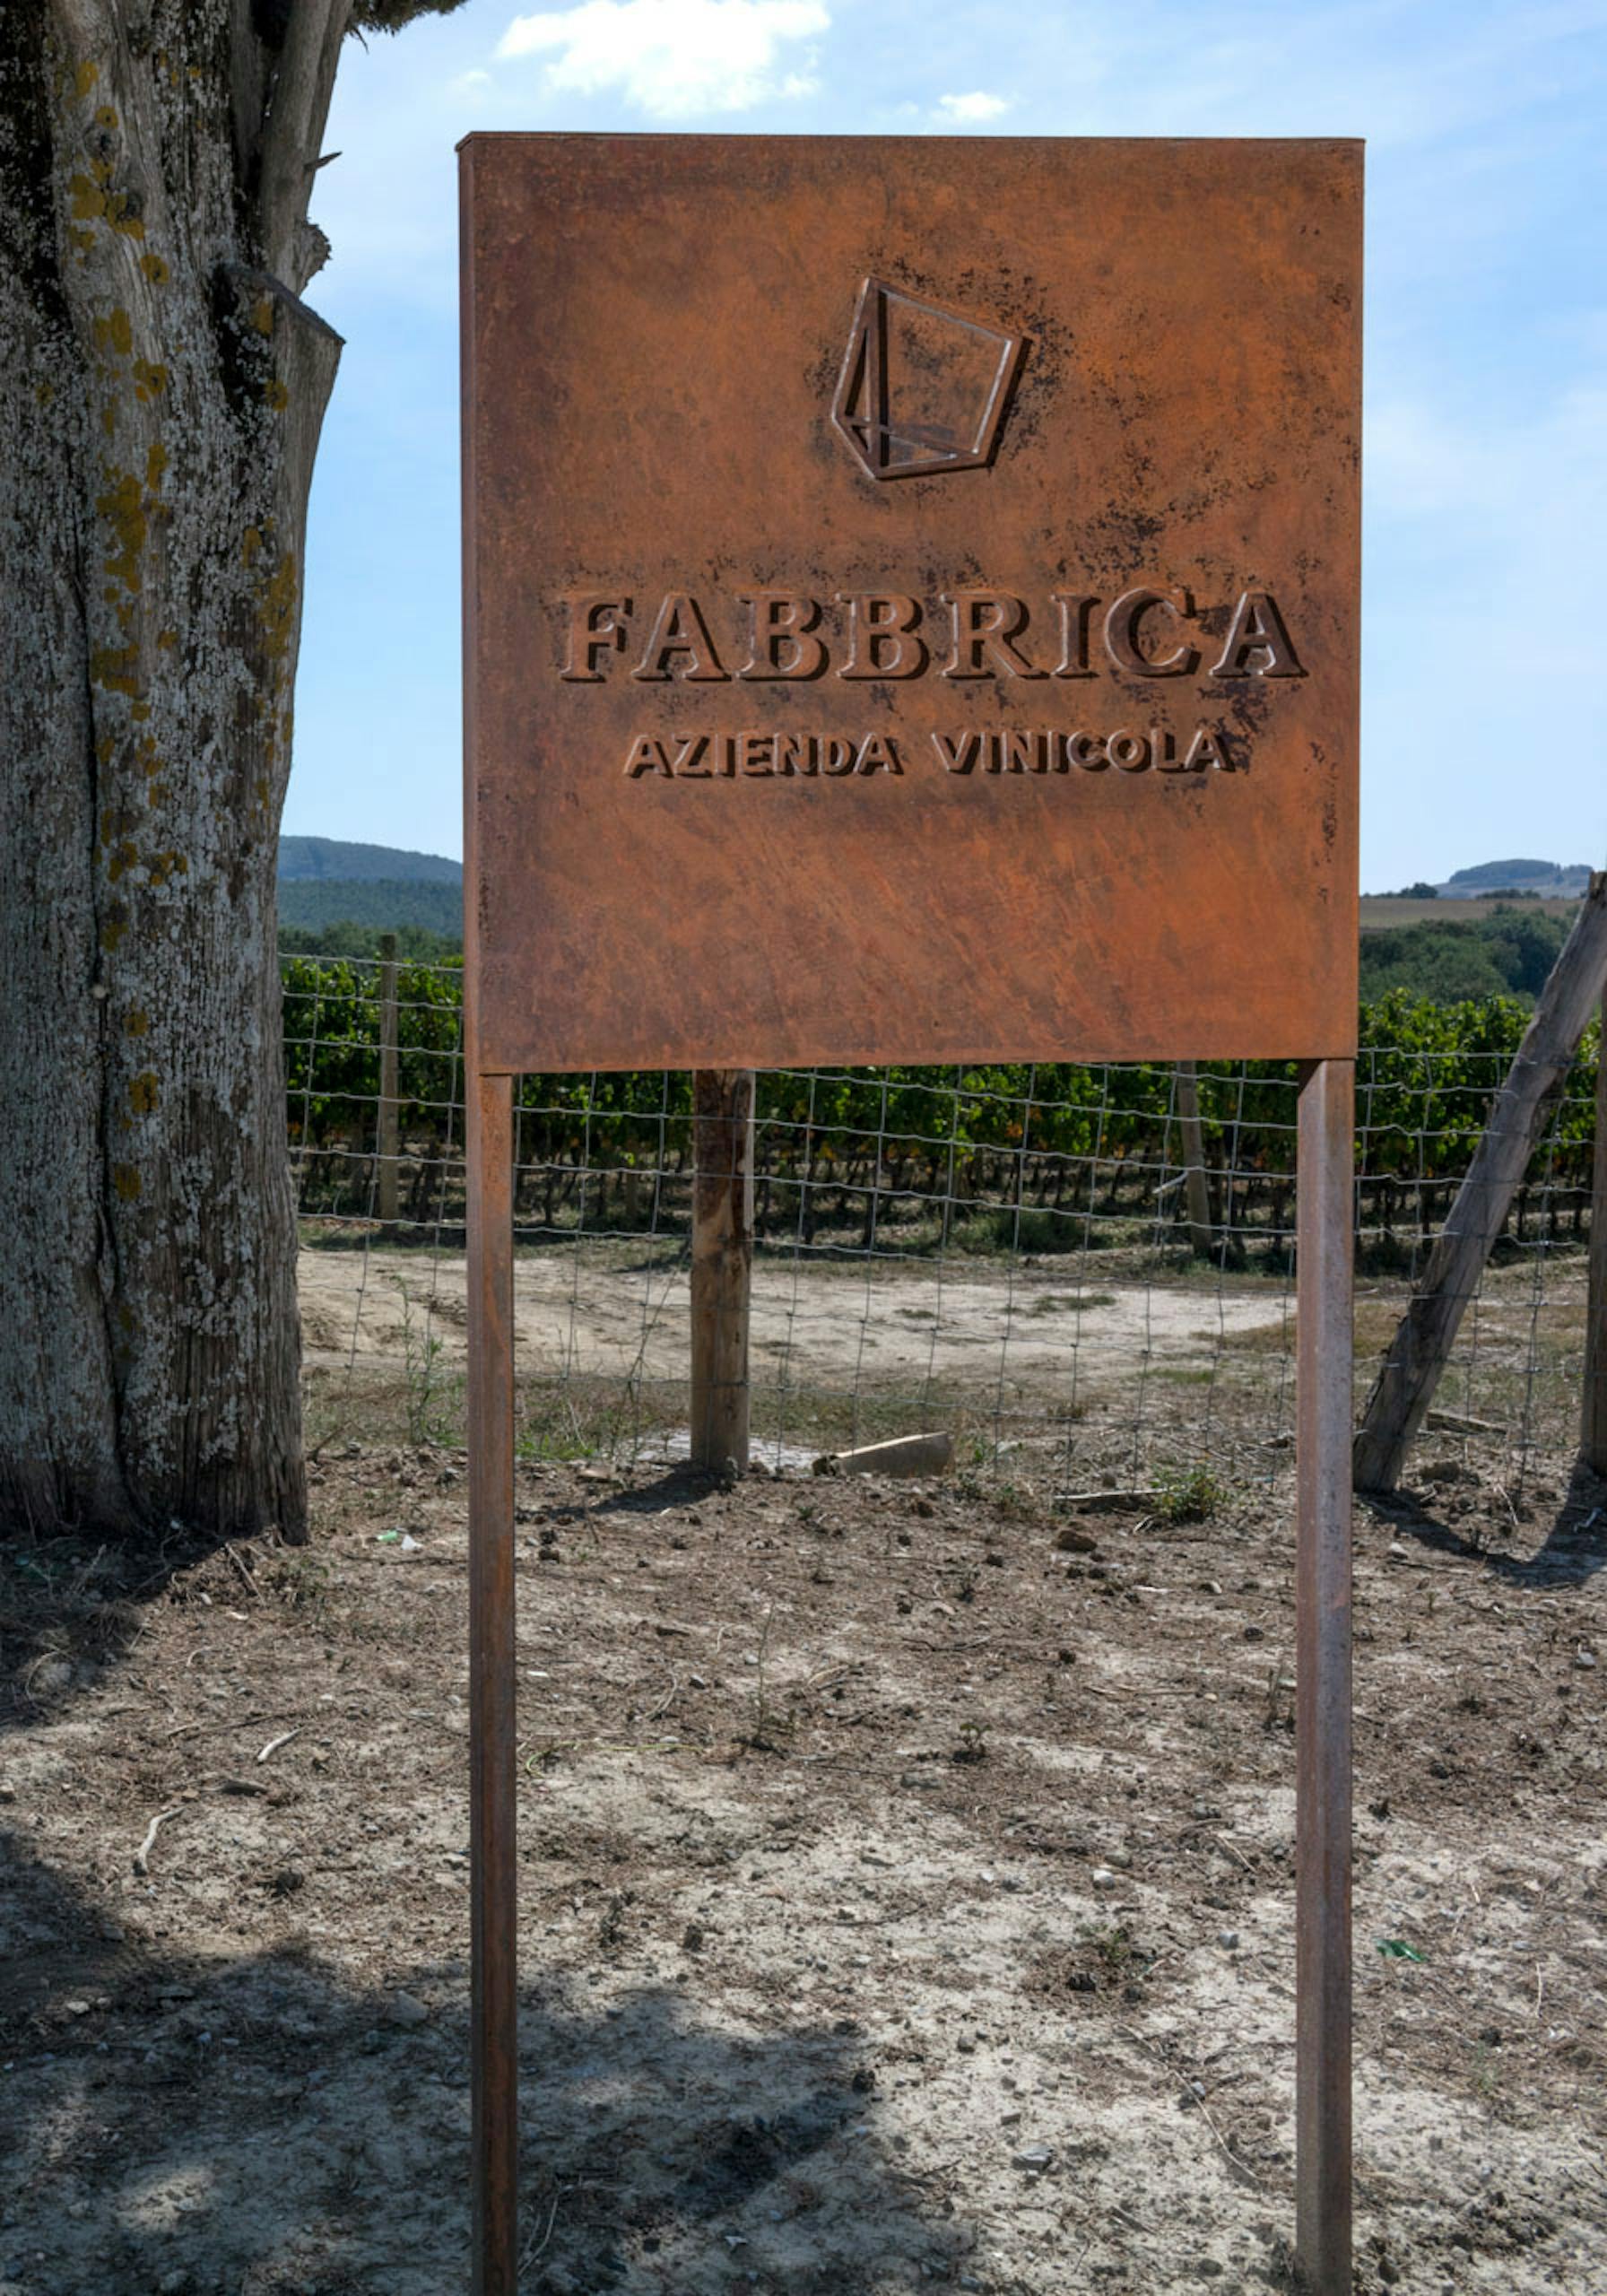 Entrance of Fabbrica with a tractor on the strada bianca, cypresses alongside and the sign of the winery